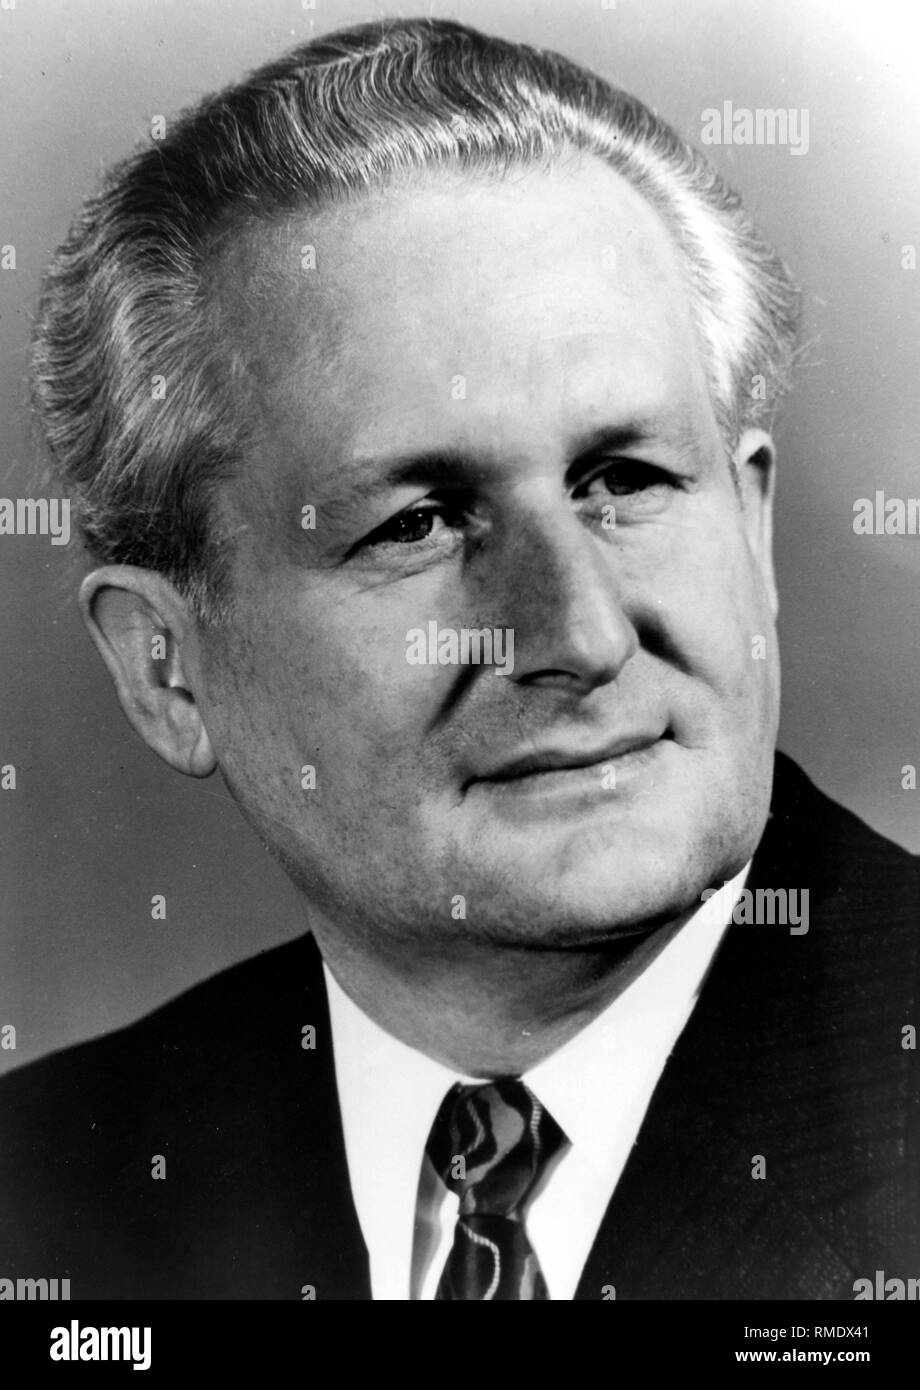 Guenter Mittag: (08.10.1926 - 18.03.1994.) between 1962 - 1989 member of the SED Central Committee, between 1982-1989 member of the Defense Council of the GDR, between 1966-1989 member of the SED Politburo, between 1962-1989 Secretary for Economics of the Central Committee. Stock Photo